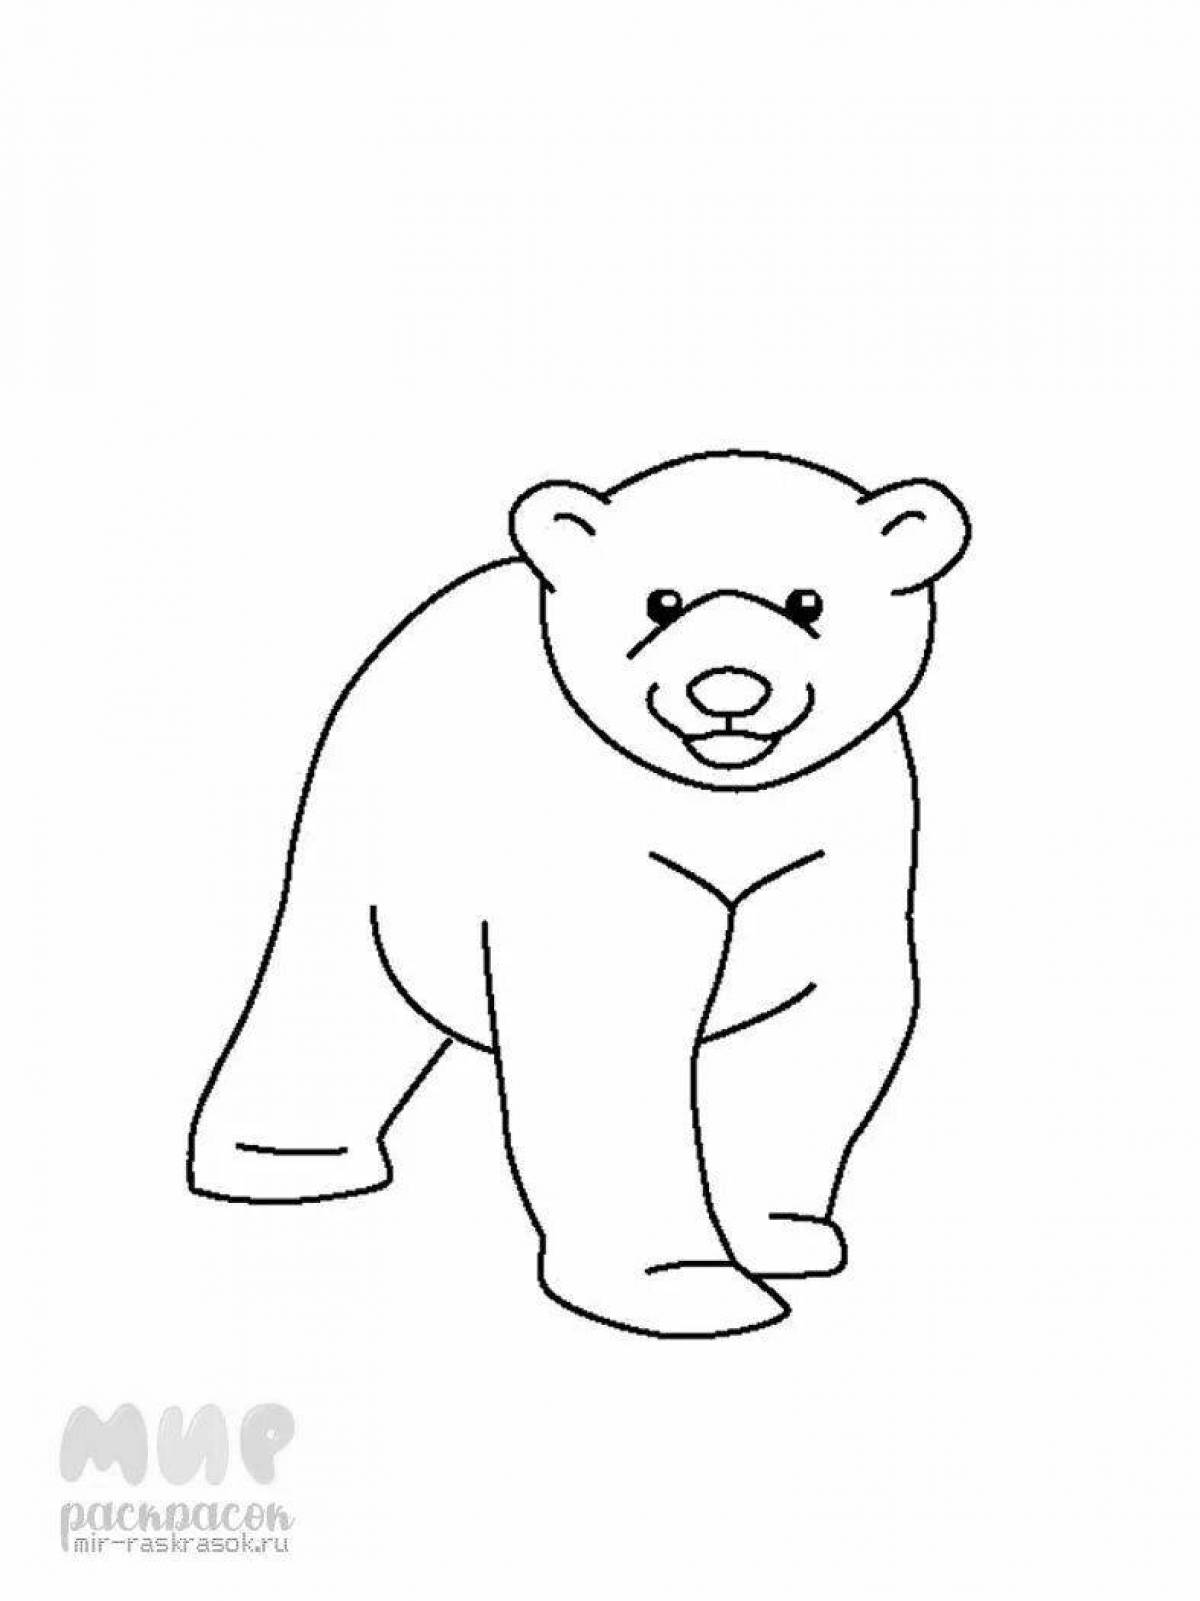 Exquisite polar bear coloring book for 3-4 year olds